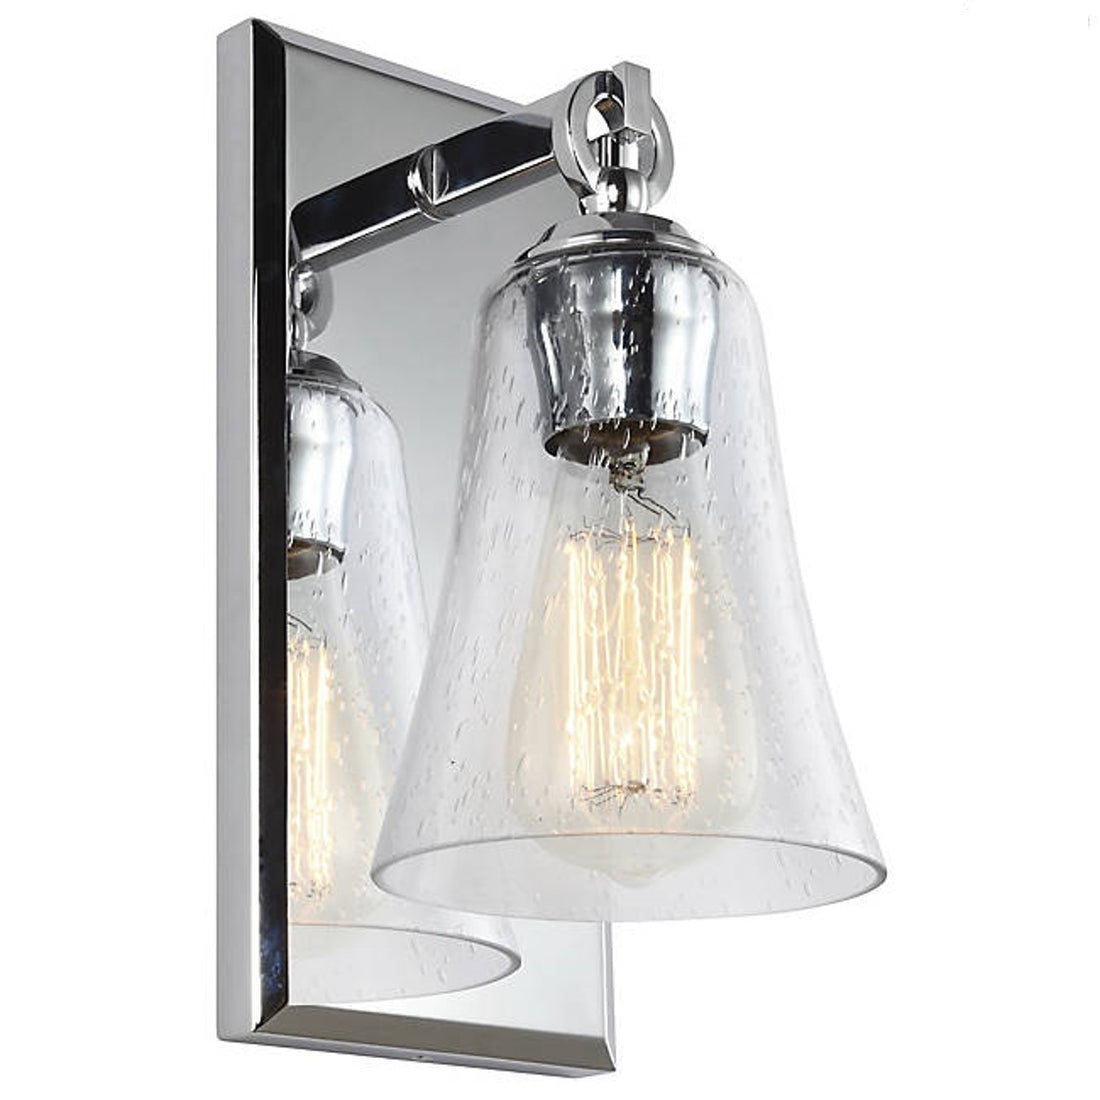 Monterro Bath Light in Chrome with Clear Seeded Bell Glass Shade by Feiss VS24701CH